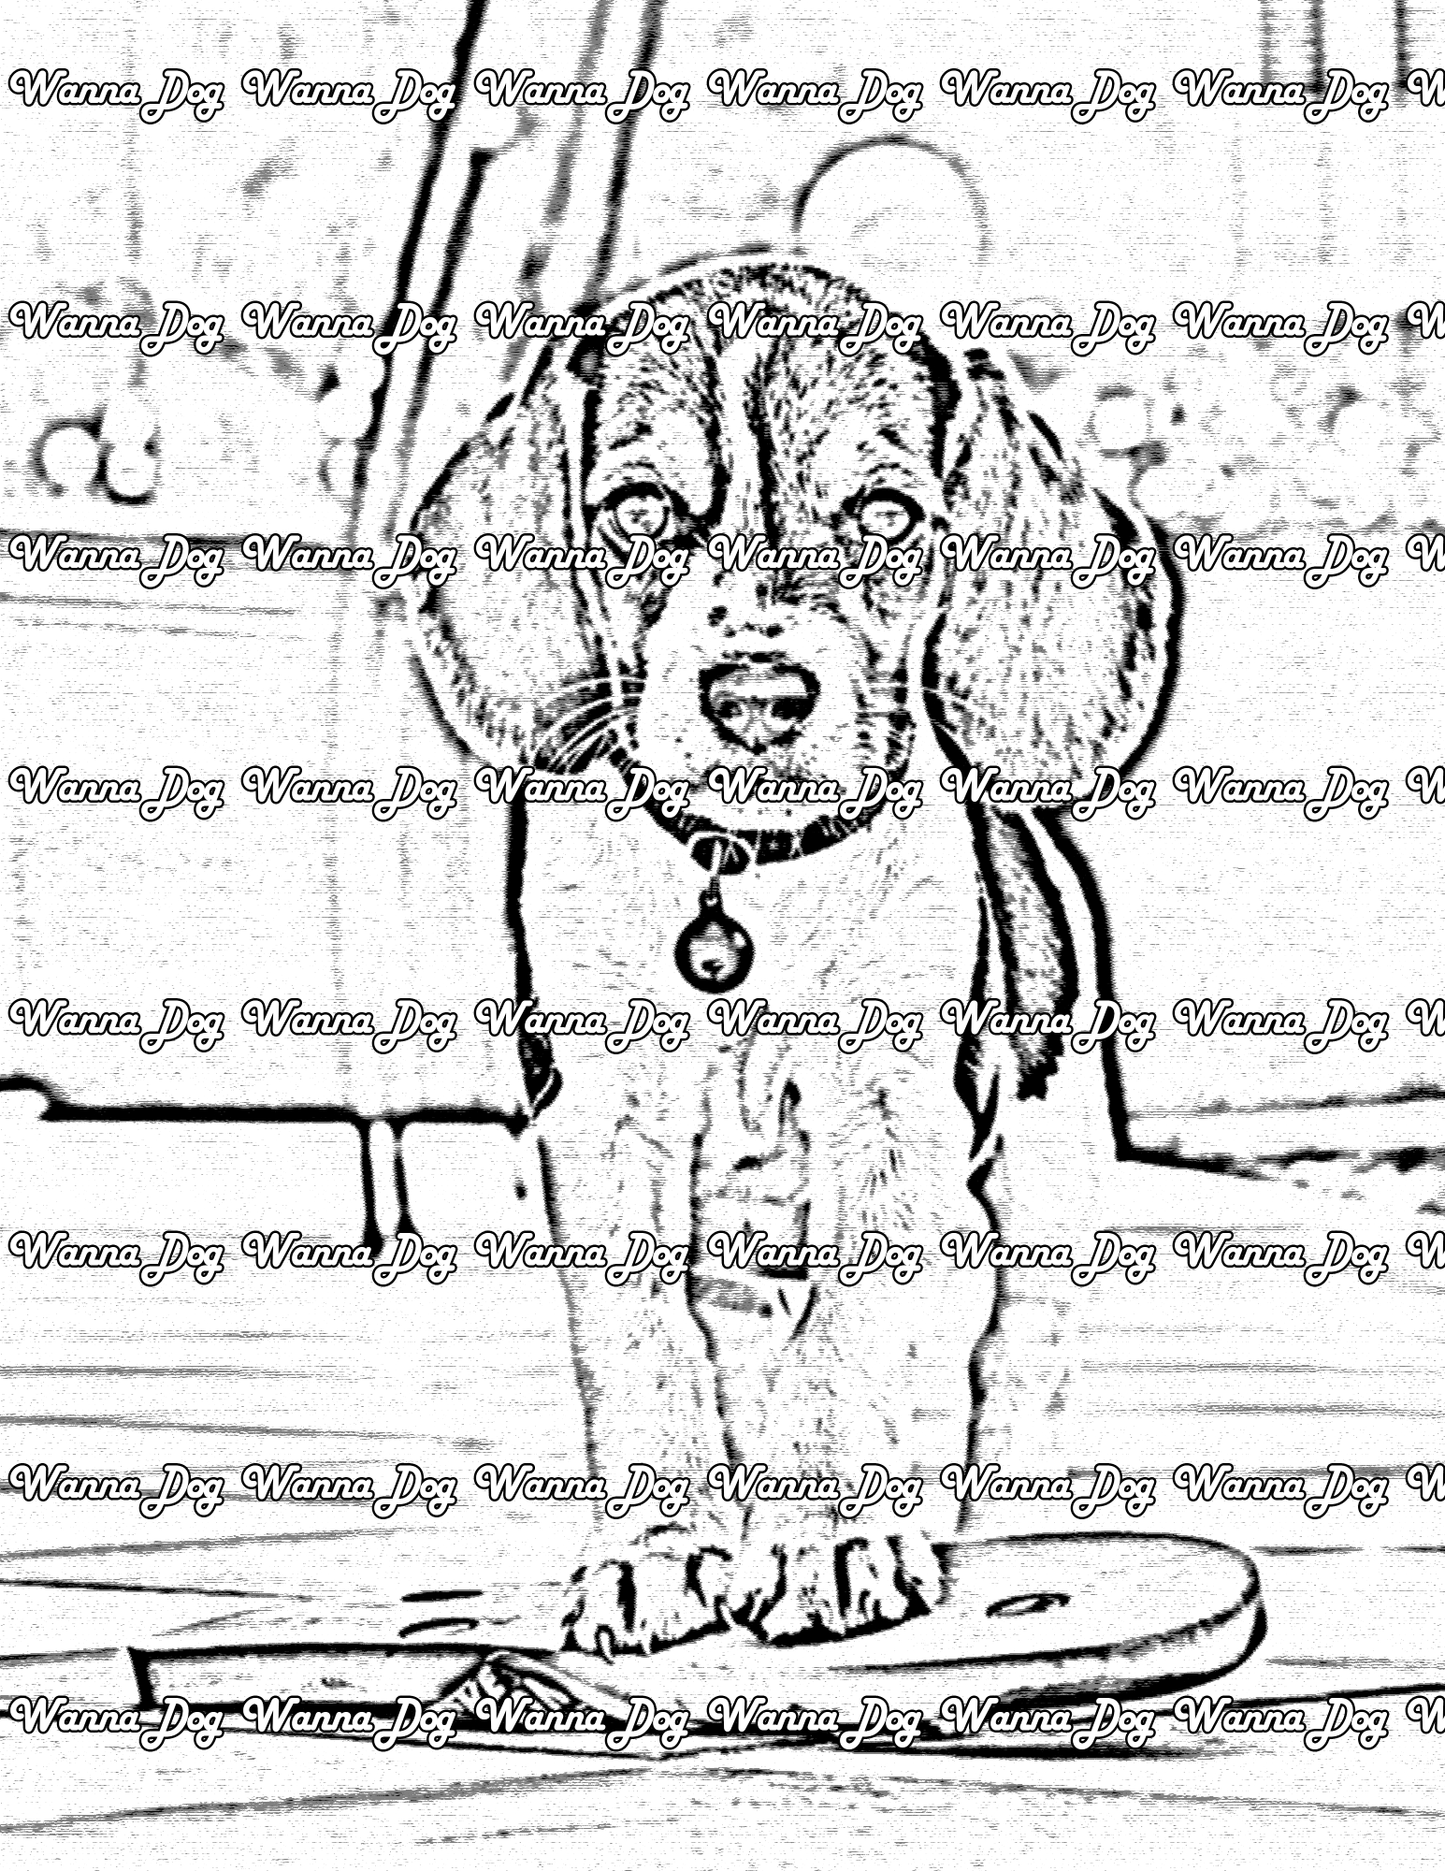 Beagle Puppy Coloring Page of a Beagle Puppy standing on a sandal